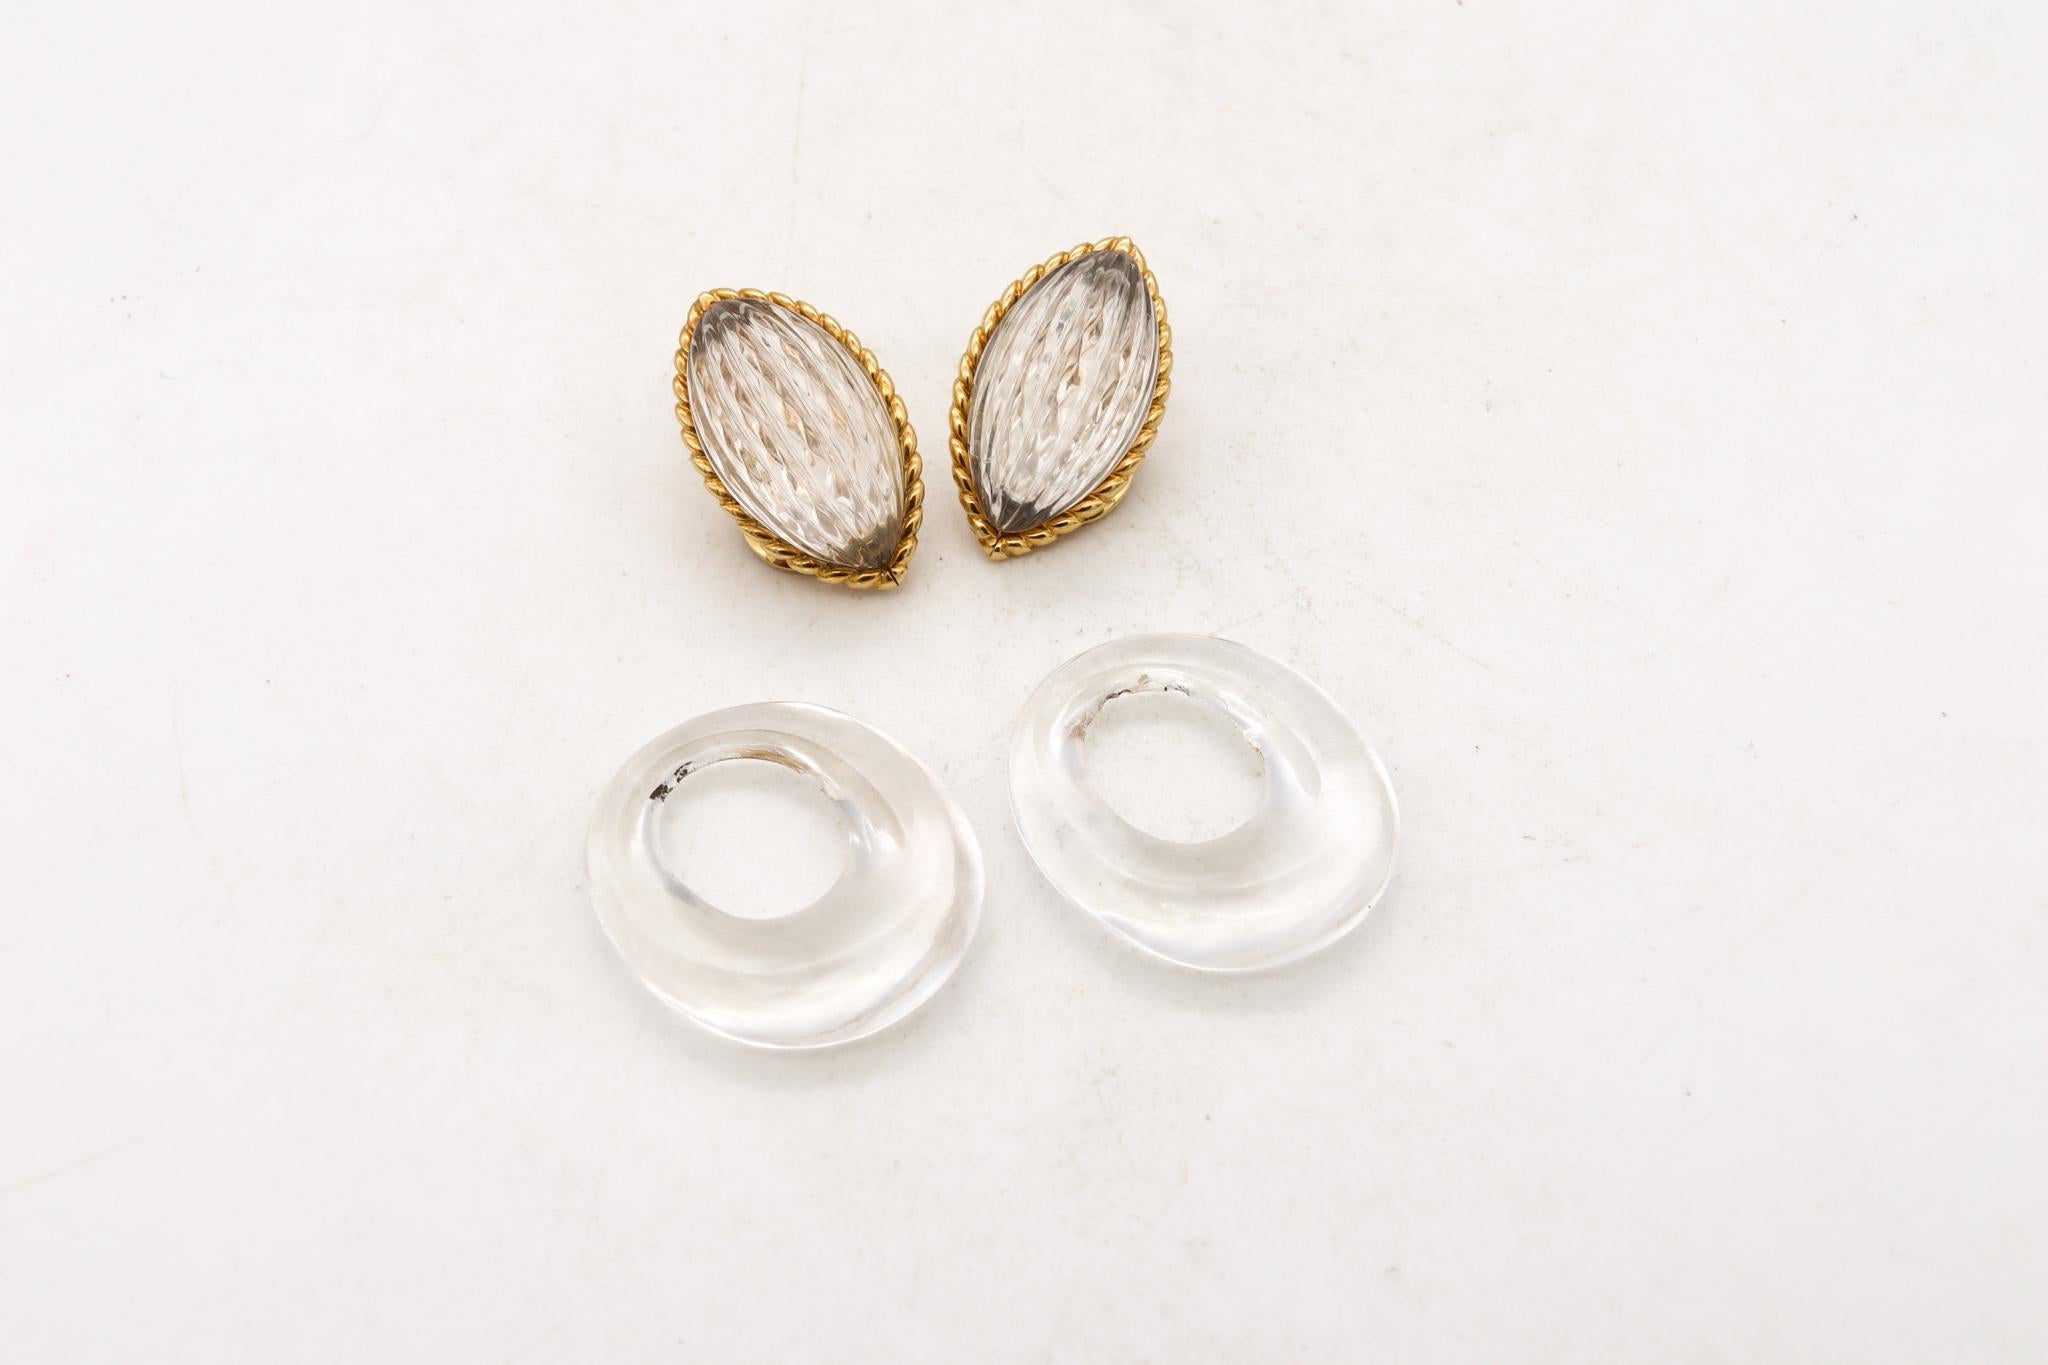 Arfan Paris 1970 Andre Vassort Convertible Earrings 18Kt Gold And Rock Quartz In Excellent Condition For Sale In Miami, FL